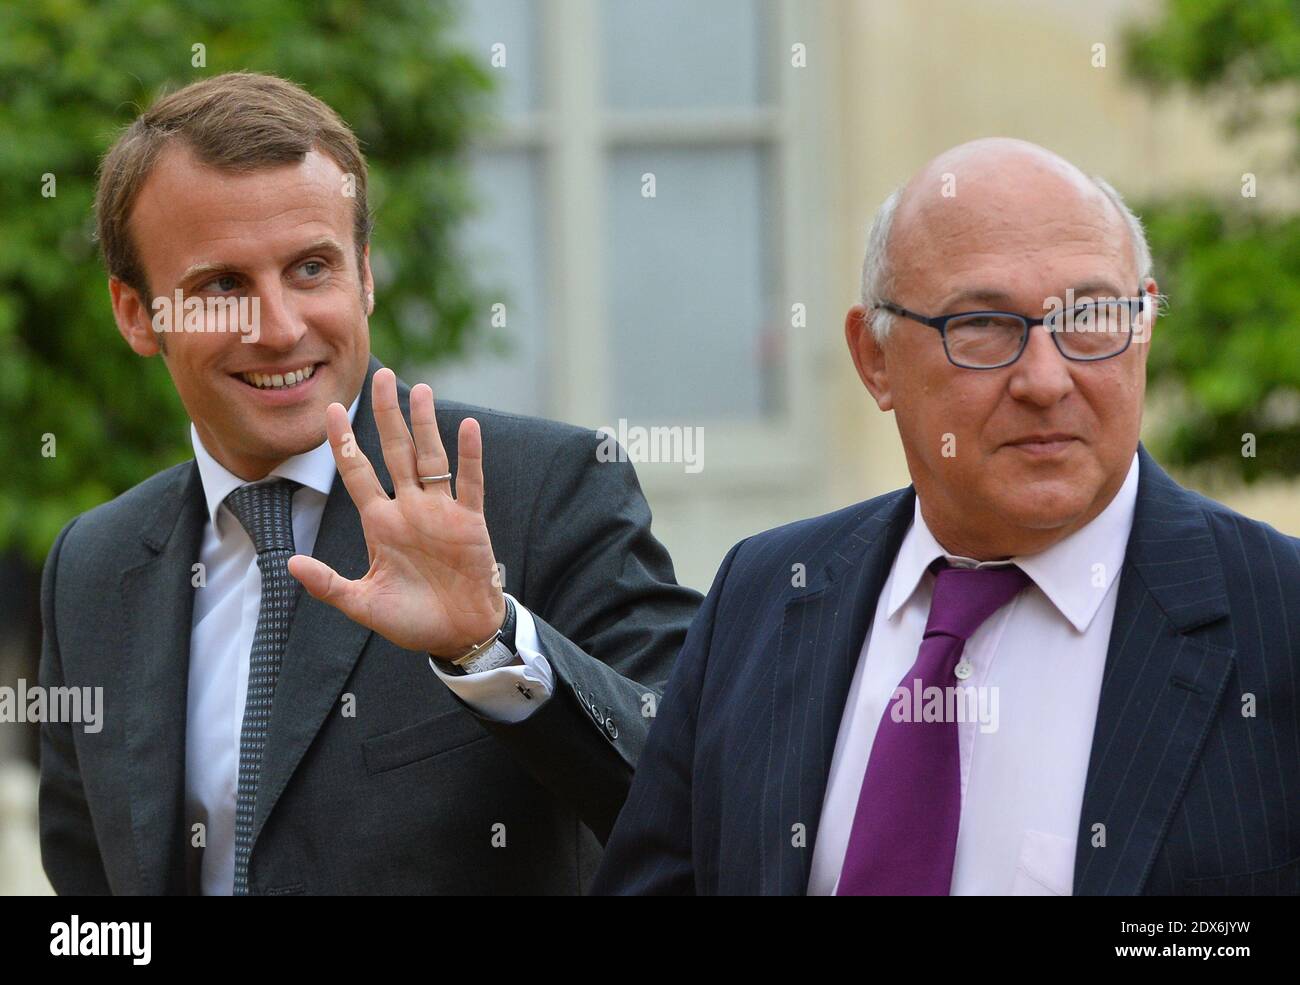 French Finance Minister Michel Sapin and newly-appointed Economy Minister Emmanuel Macron arriving at the Elysee presidential palace in Paris, France before a weekly cabinet meeting. French President Francois Hollande on August 27 installed a former banker and ally as economy minister in an emergency reshuffle seen as the 'last chance' to haul France out of the biggest crisis of his presidency. Hollande caught everyone off guard with the appointment of Emmanuel Macron, a 36-year-old ex-Rothschild banker and architect of the president's economic policy. Photo by Christian Liewig/ABACAPRESS.COM Stock Photo